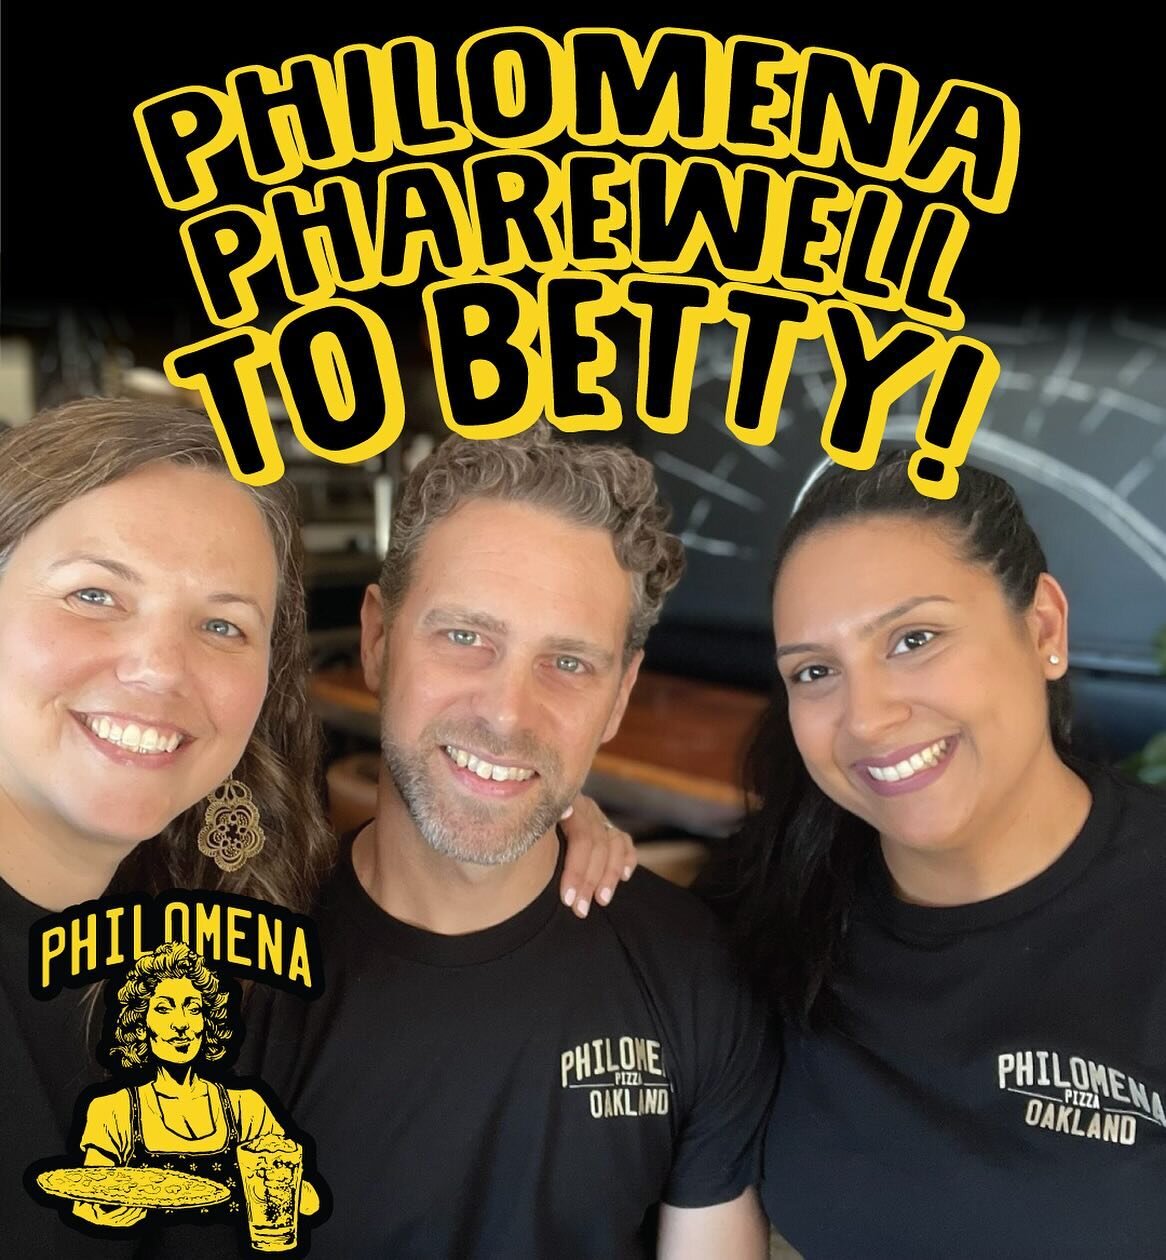 To all that enjoy evenings at Philomena since the beginning with Betty, we have some big news! Betty has had some MAJOR Awesome life happenings recently, and we are so happy for her. This Tuesday 27th will likely be her last evening. Please stop by a